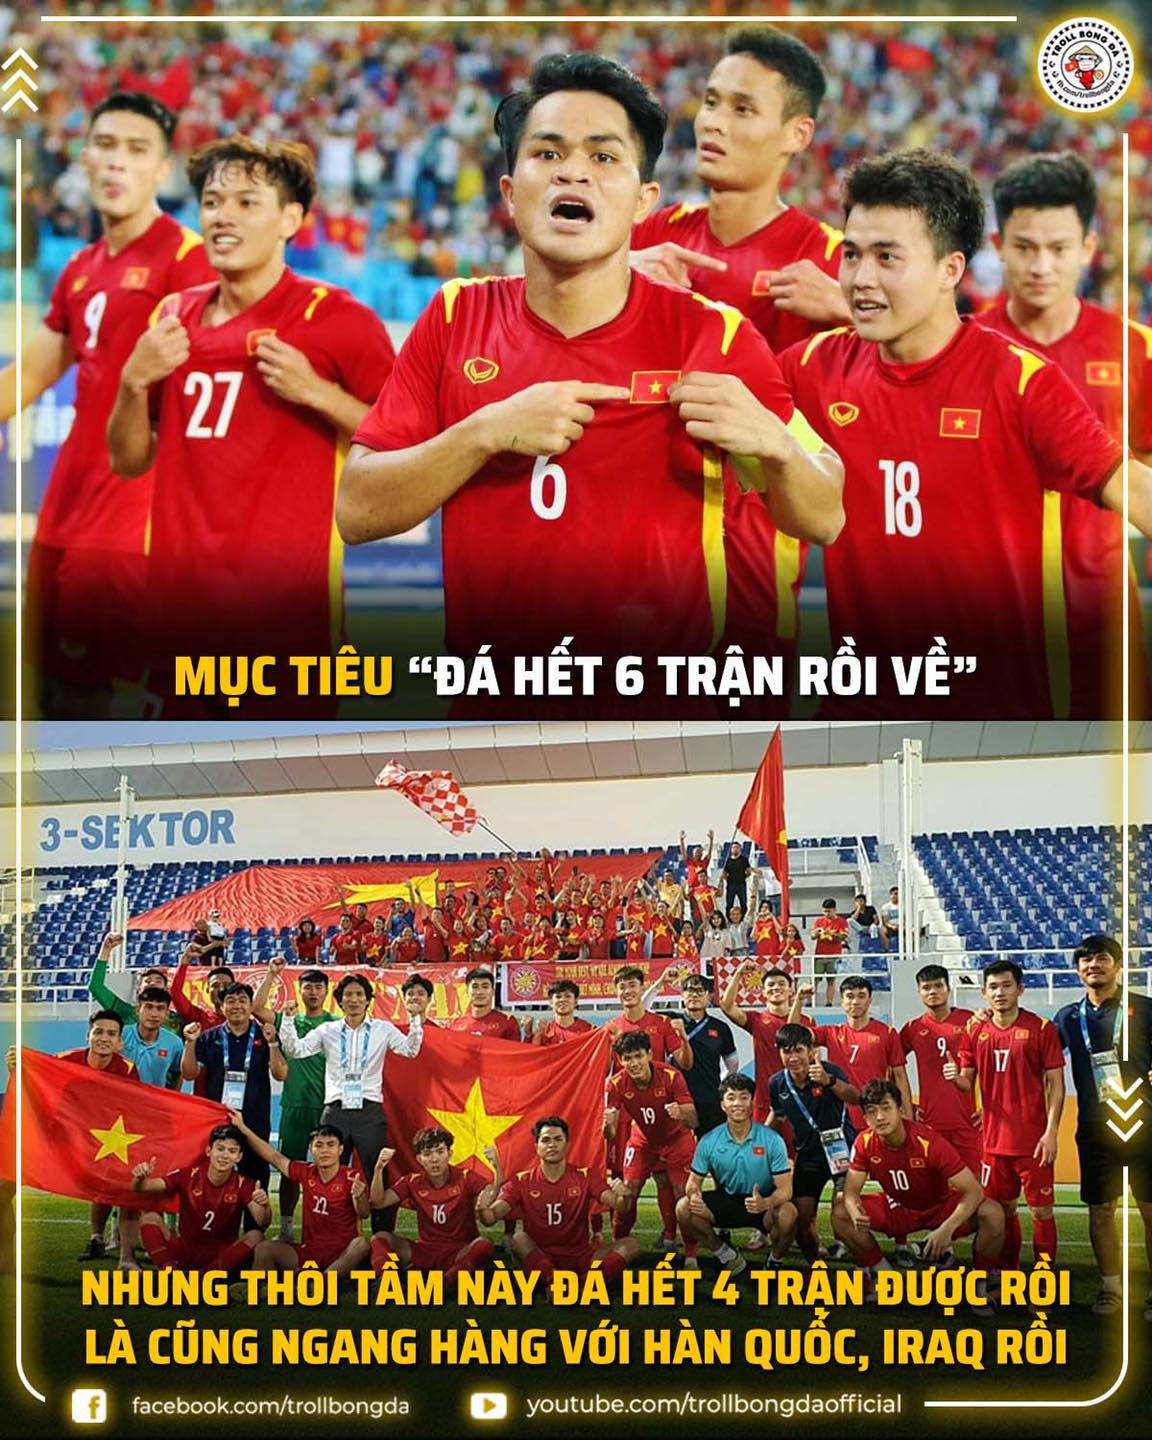 biem hoa 24h Dt anh lam nguy o nations league hinh anh 2